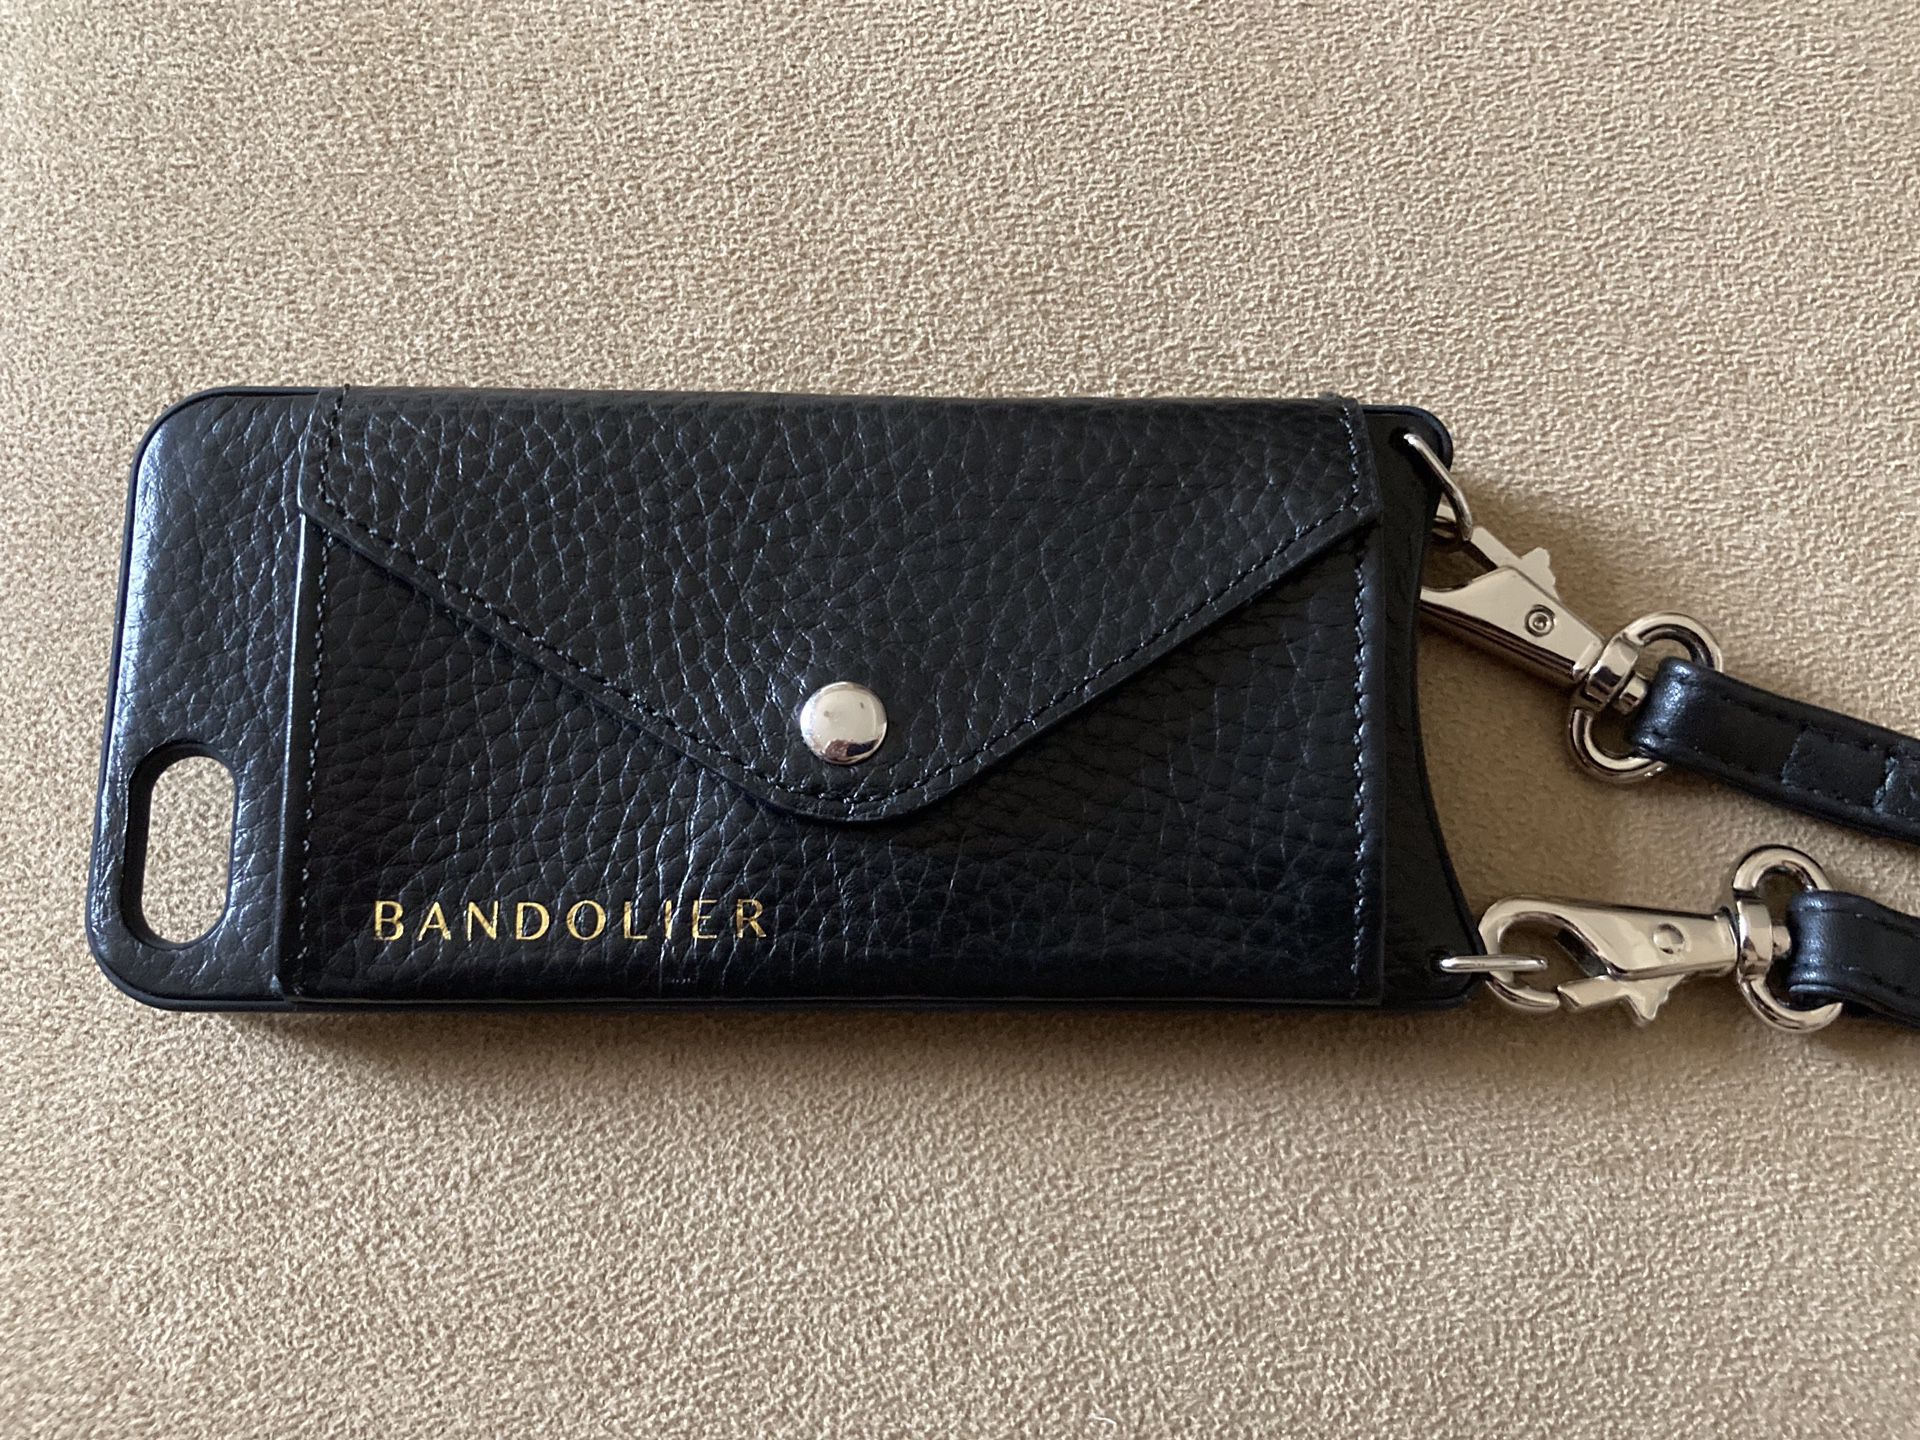 Bandolier IPhone 5/5s/SE 1st Edition Crossbody Side Pocket Case. Condition is Like New